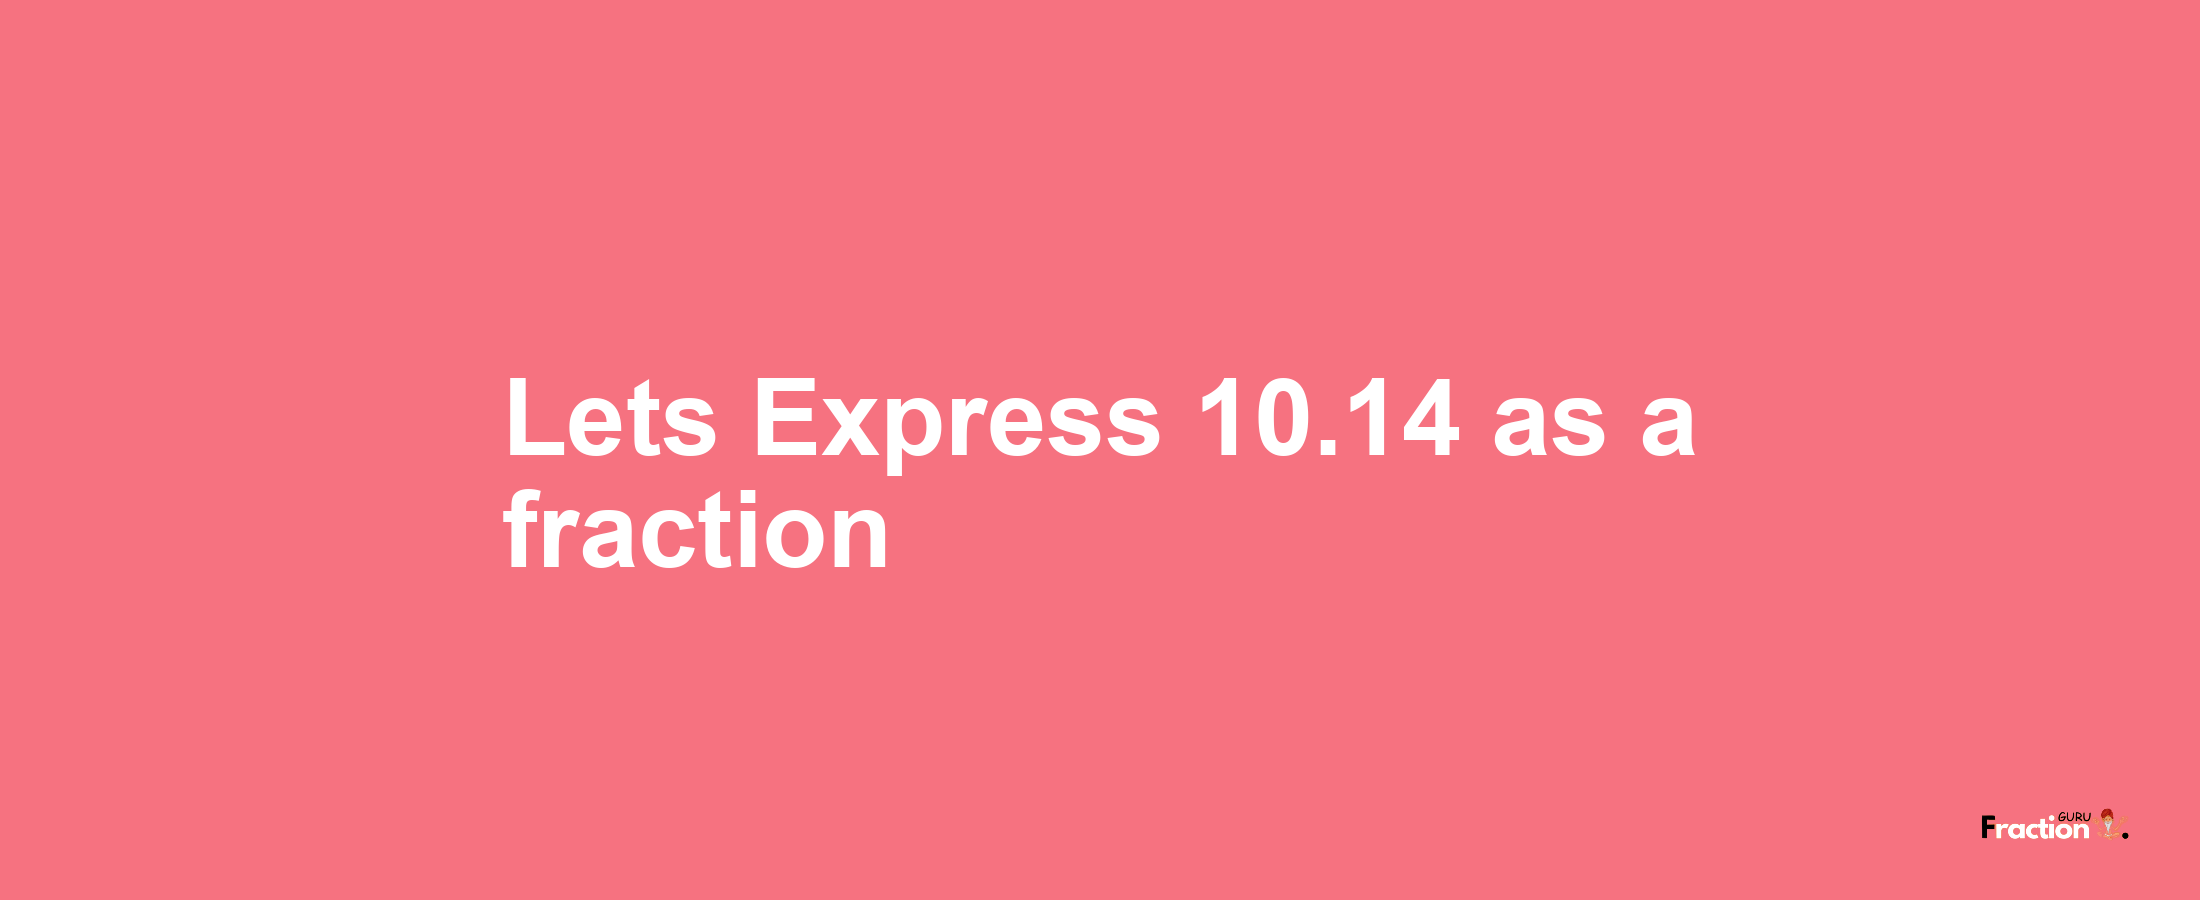 Lets Express 10.14 as afraction